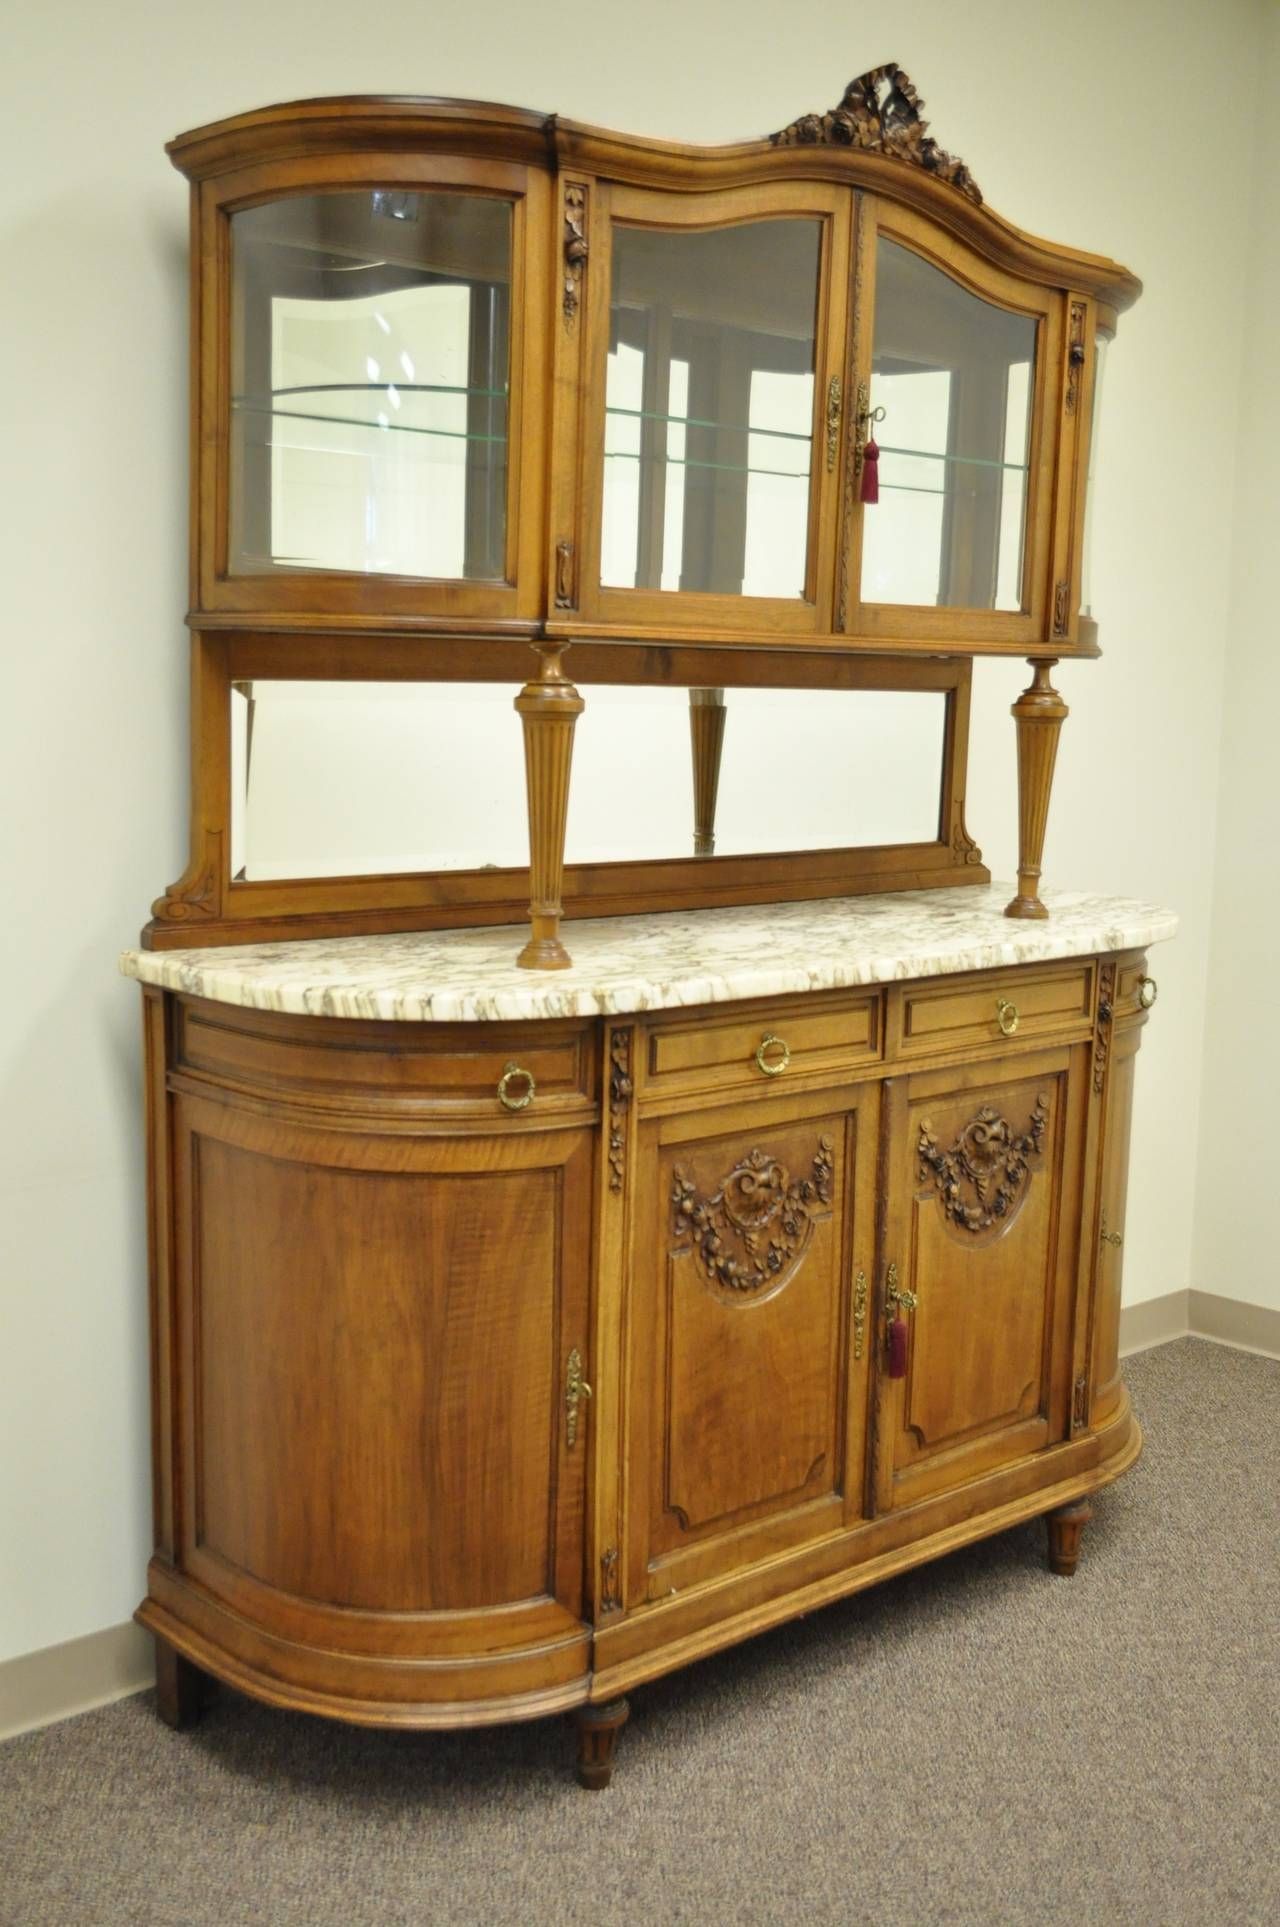 French Louis Xvi Style Marble Top Sideboard Or Curio Cabinet With Recent Marble Top Sideboards (View 9 of 15)